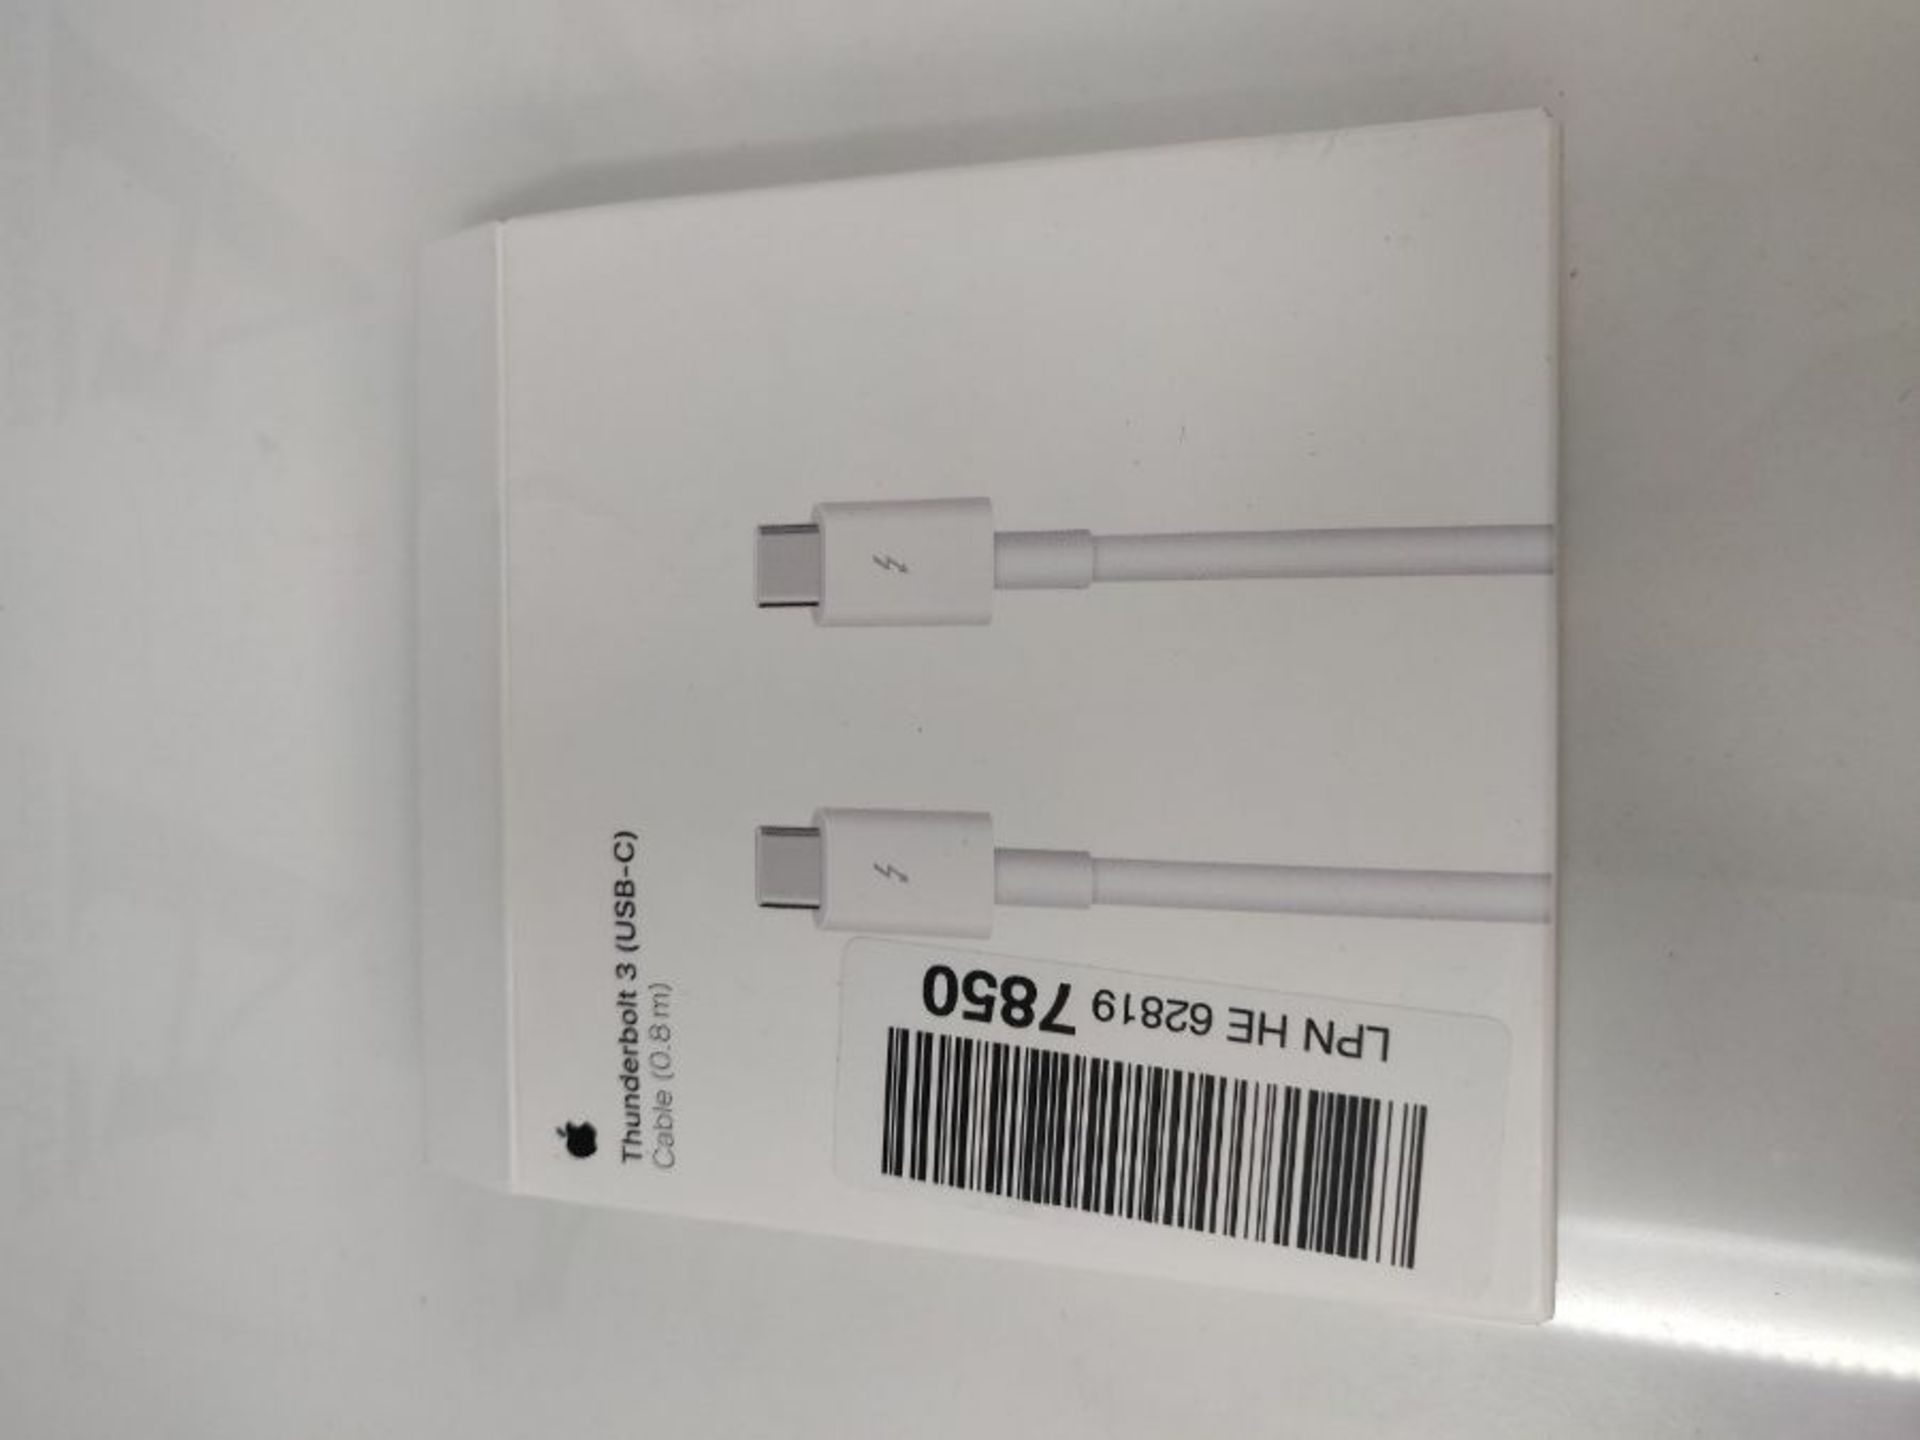 Thunderbolt 3 (USB-C) Cable (0.8m) - Image 2 of 3